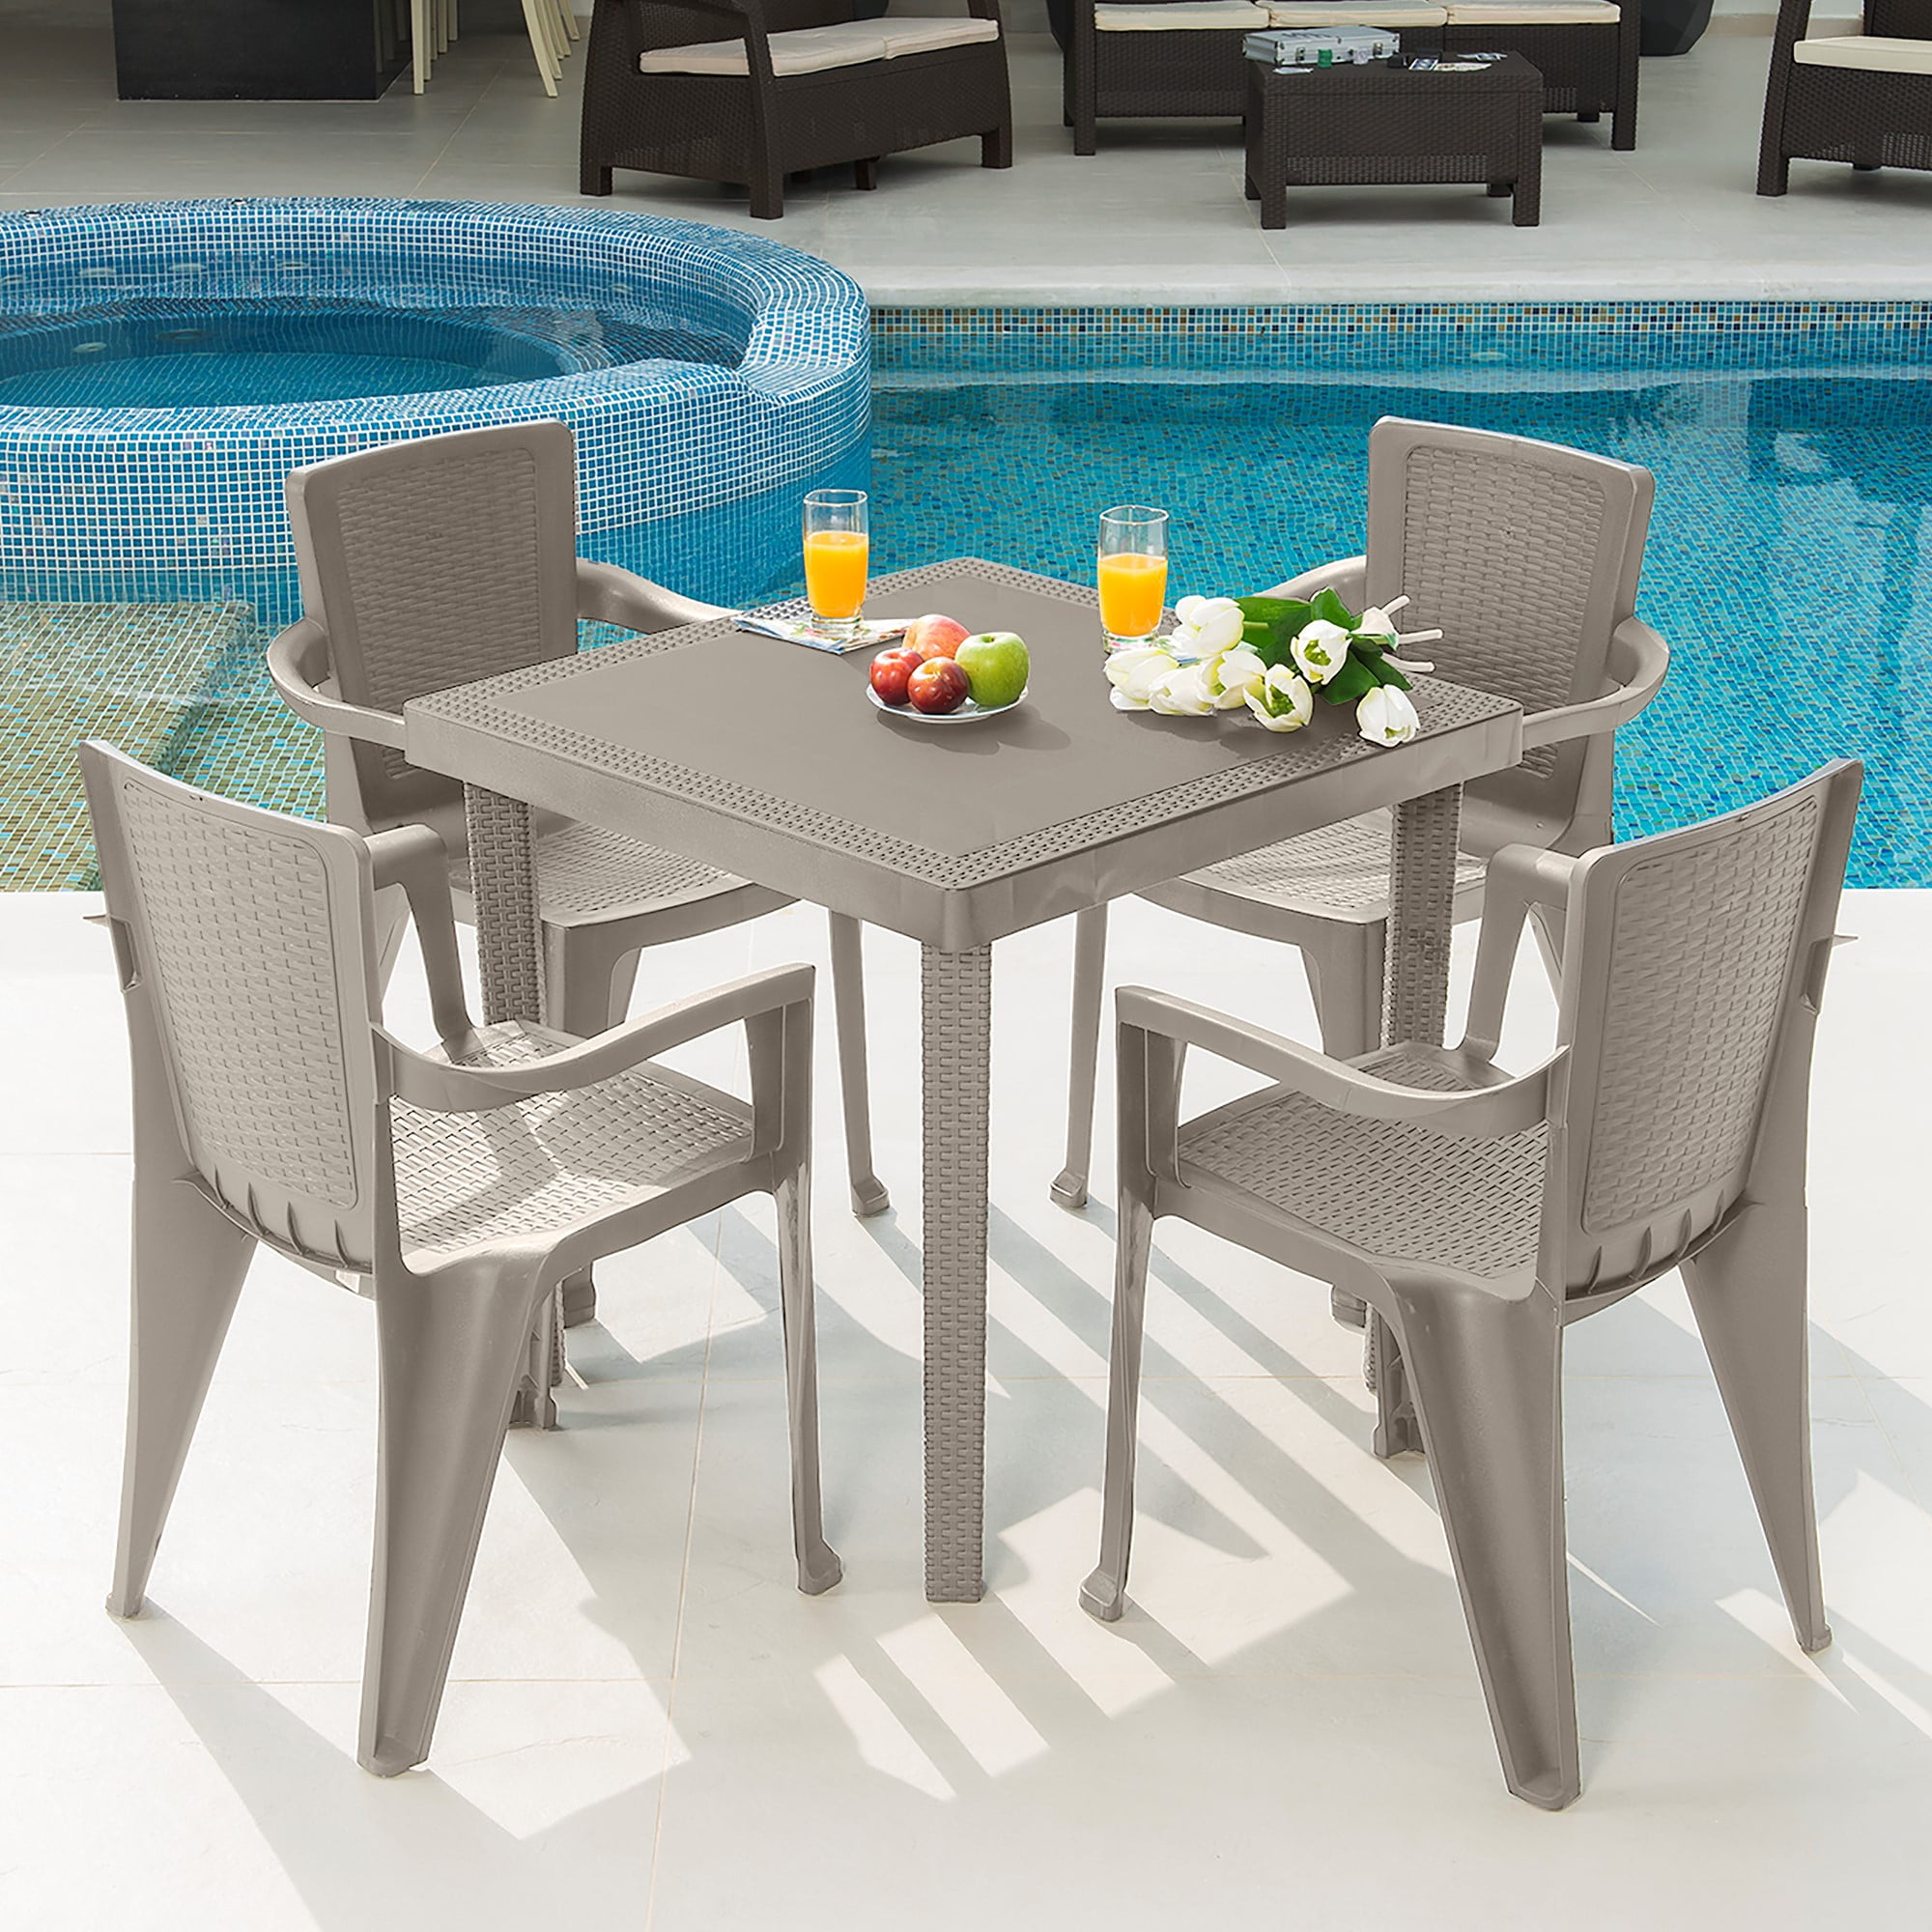 mq infinity pp resin 5-piece outdoor patio table and chairs set, taupe